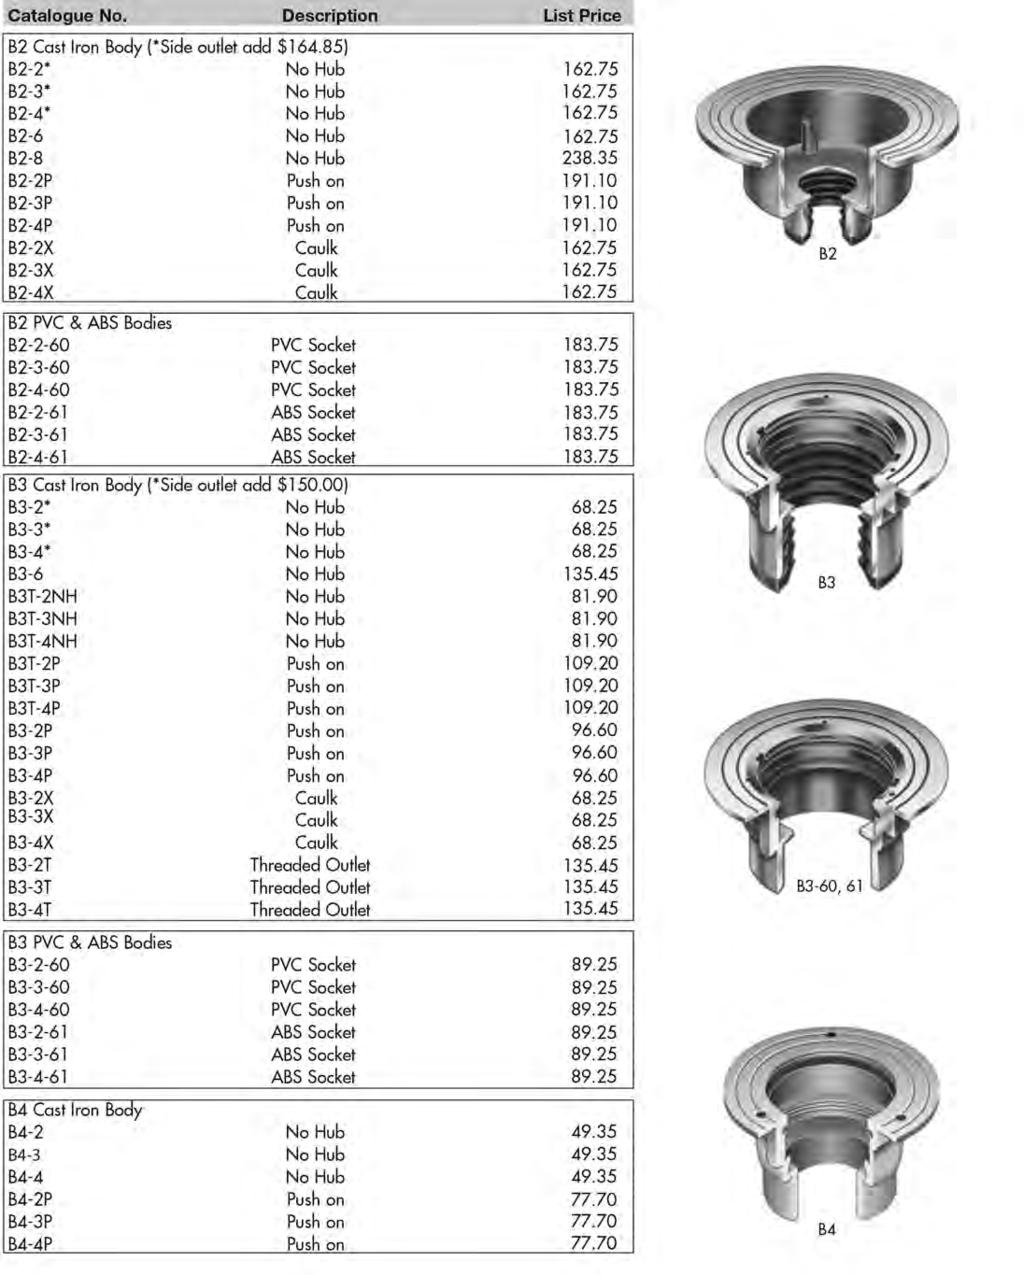 Specification Drainage Modular Parts Modular Bodies For Floor Drains & Cleanouts Catalogue No. Description List Price B2 Cast Iron Body (*Side outlet add $173.09) B2-2* No Hub $179.